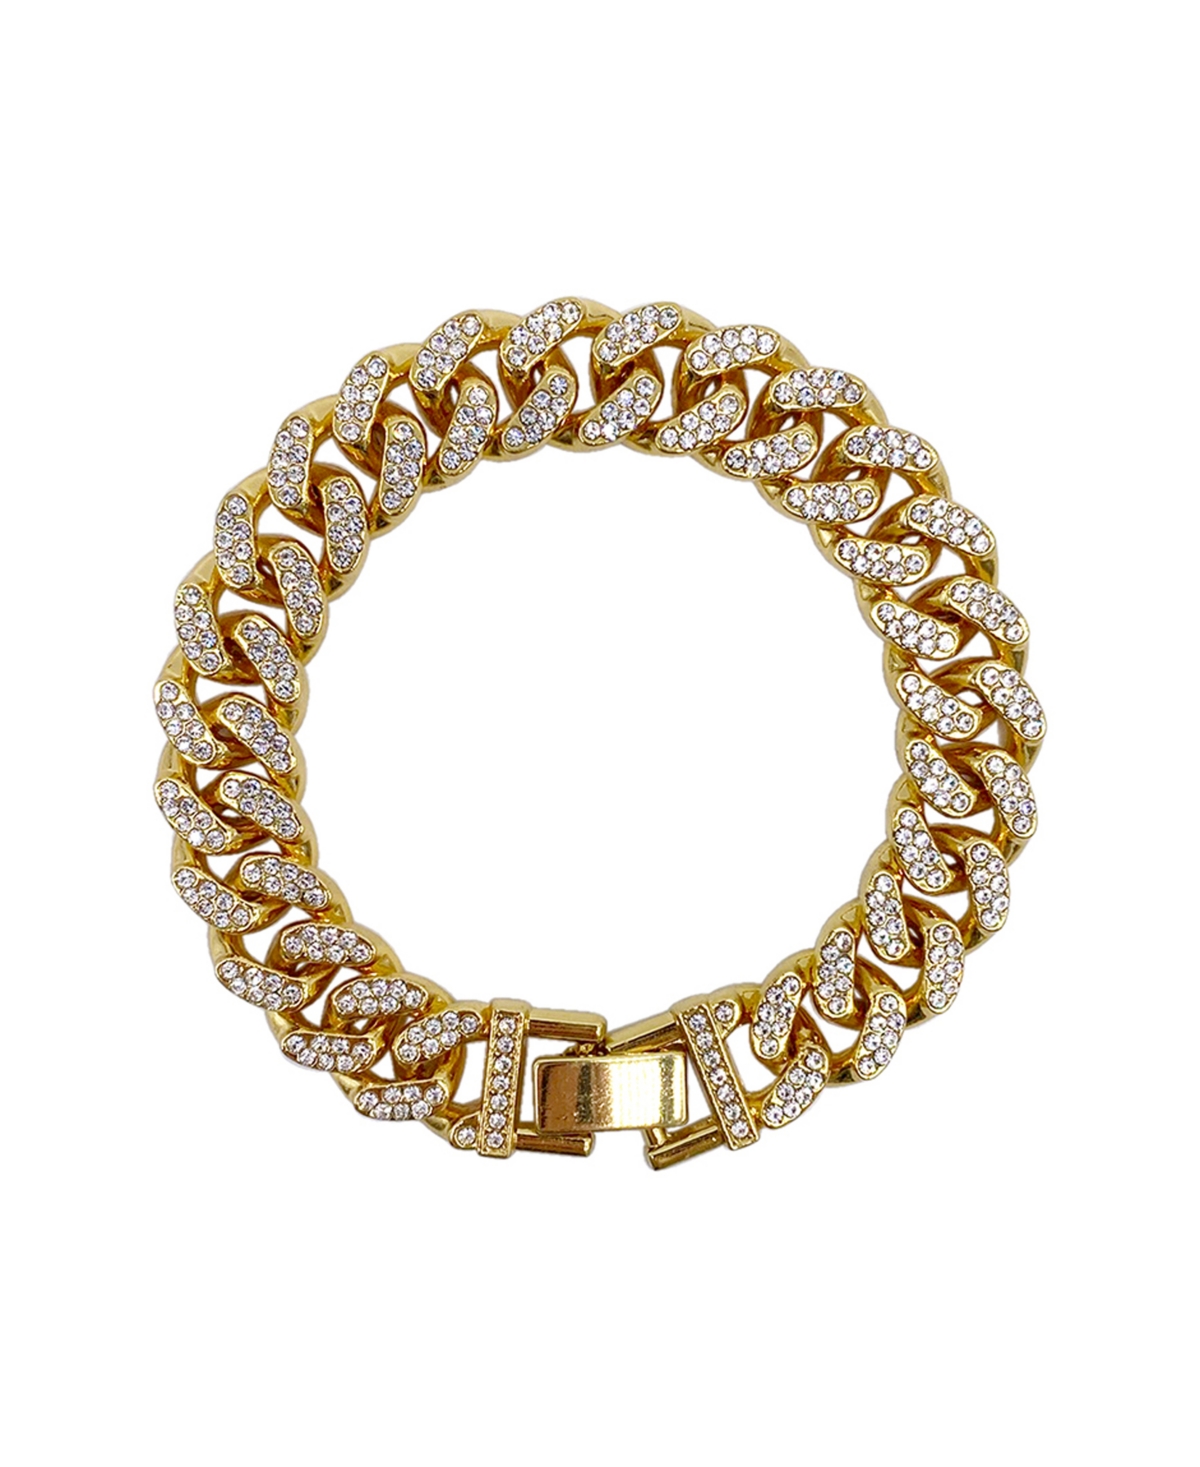 Women's Gold-Tone Plated Crystal Thick Cuban Curb Chain Bracelet - Yellow